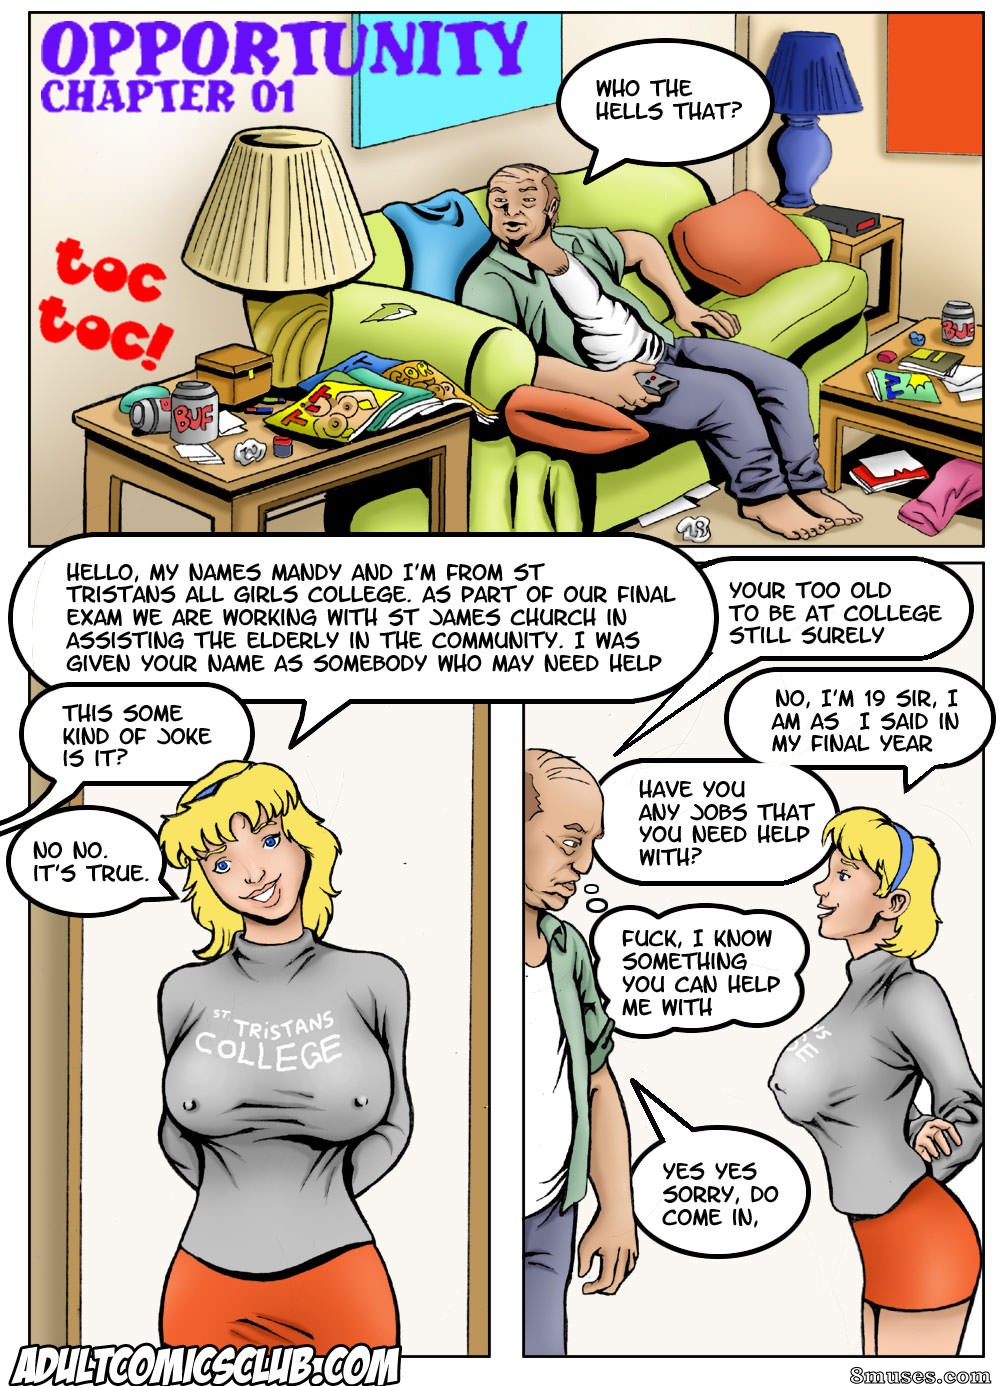 Adult Porn Cartoons Old Folks - Old Mans Opportunity - 8muses Comics - Sex Comics and Porn Cartoons